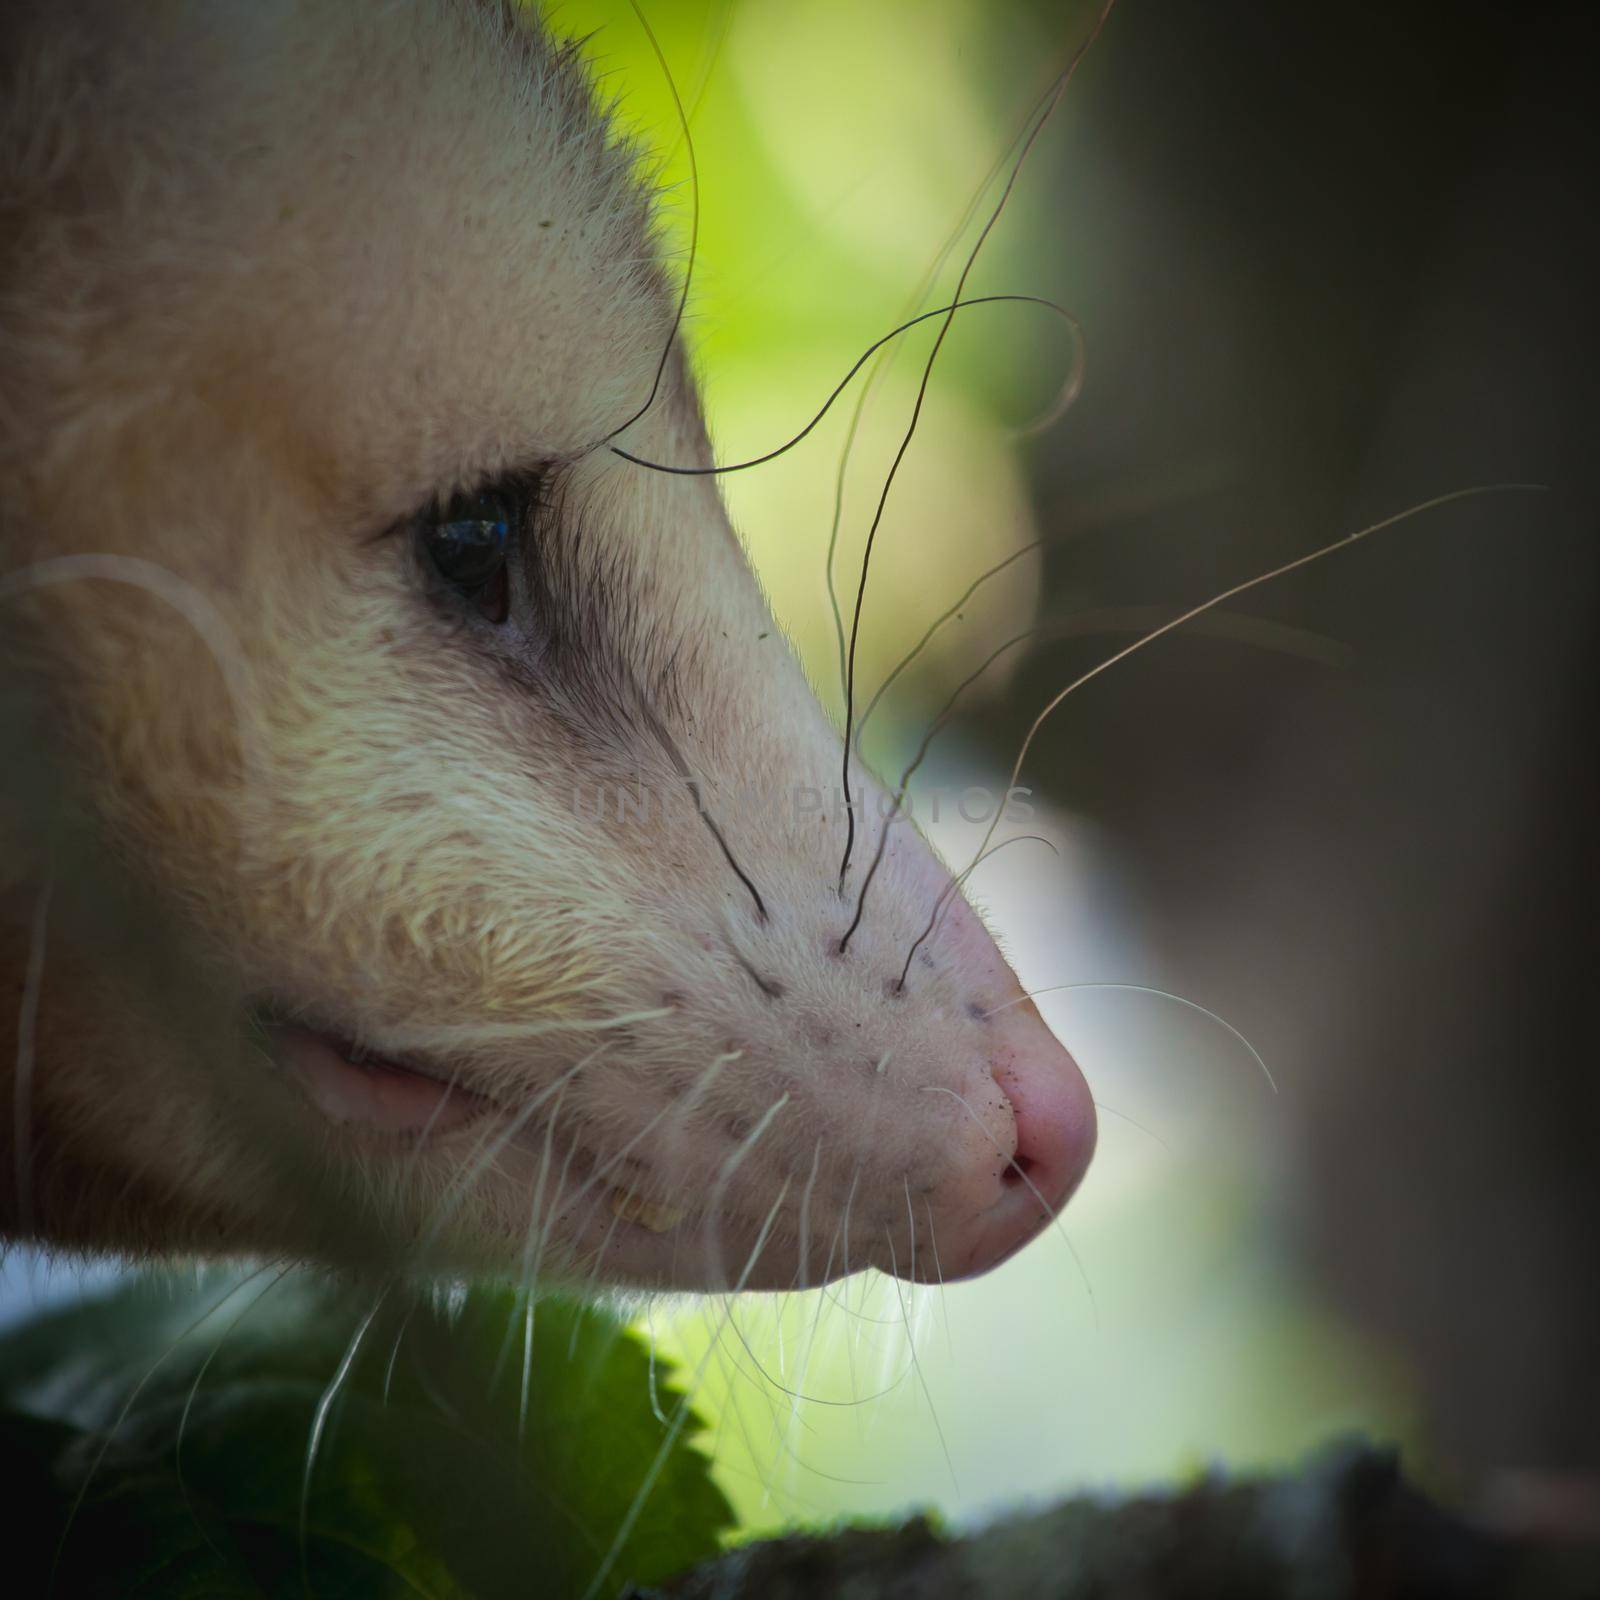 The Virginia opossum in the garden by RosaJay